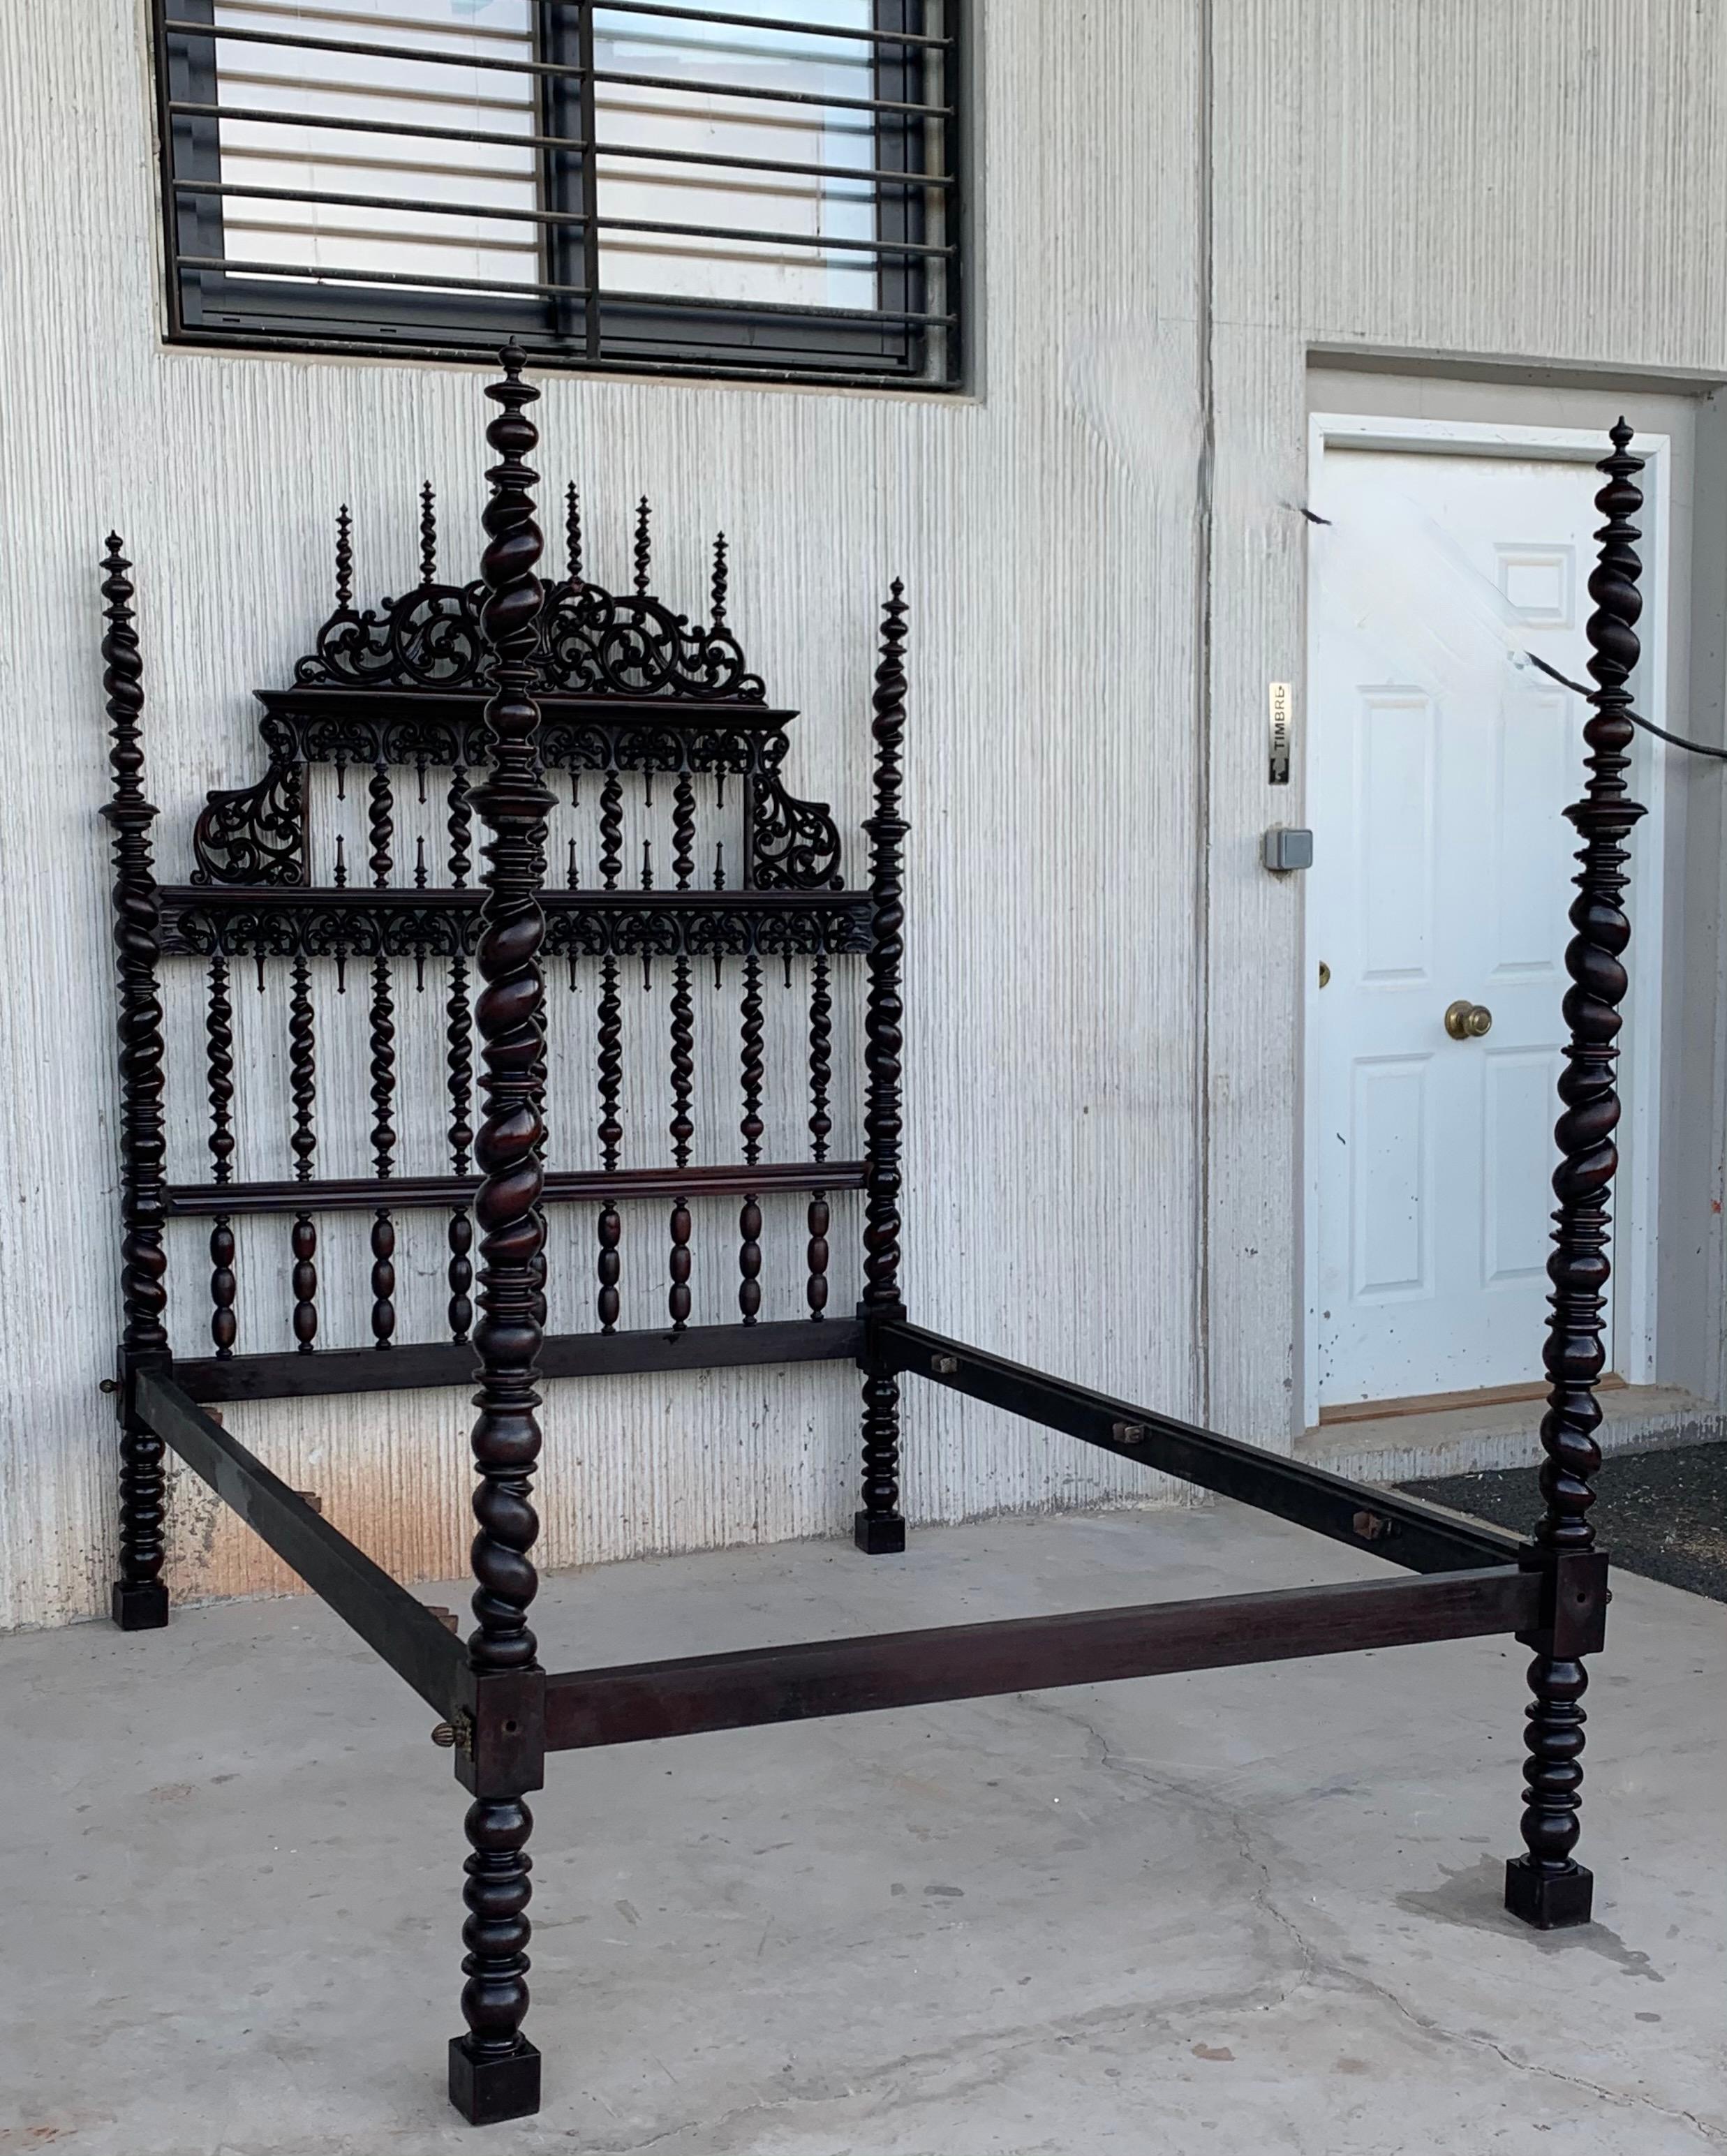 19th century Baroque bed, original Lisbon bed

This Queen size 4-poster bed is hand carved with elaborate details, spiral turned post, 3D open spiral twist spindles, and Moorish details represented by the repetition of arches. It is carved and